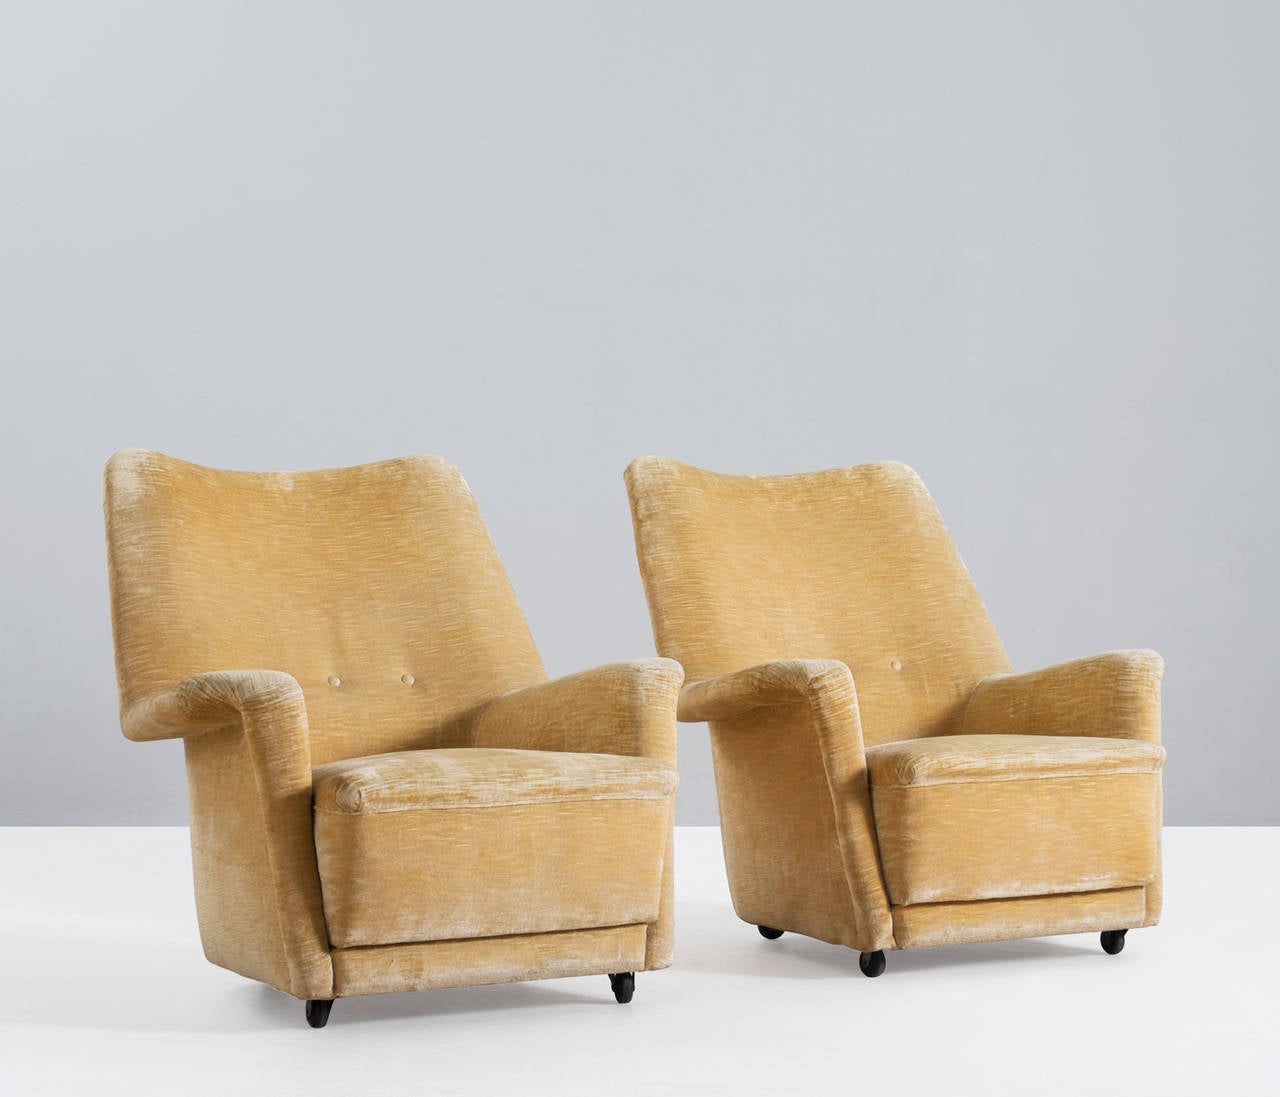 Pair of Italian lounge chairs, 1950s.

These well made armchairs have an excellent comfort, the original fabric is well preserved. The relatively high back gives a pleasant back support, the armrests are slightly angled which emphasizes the great